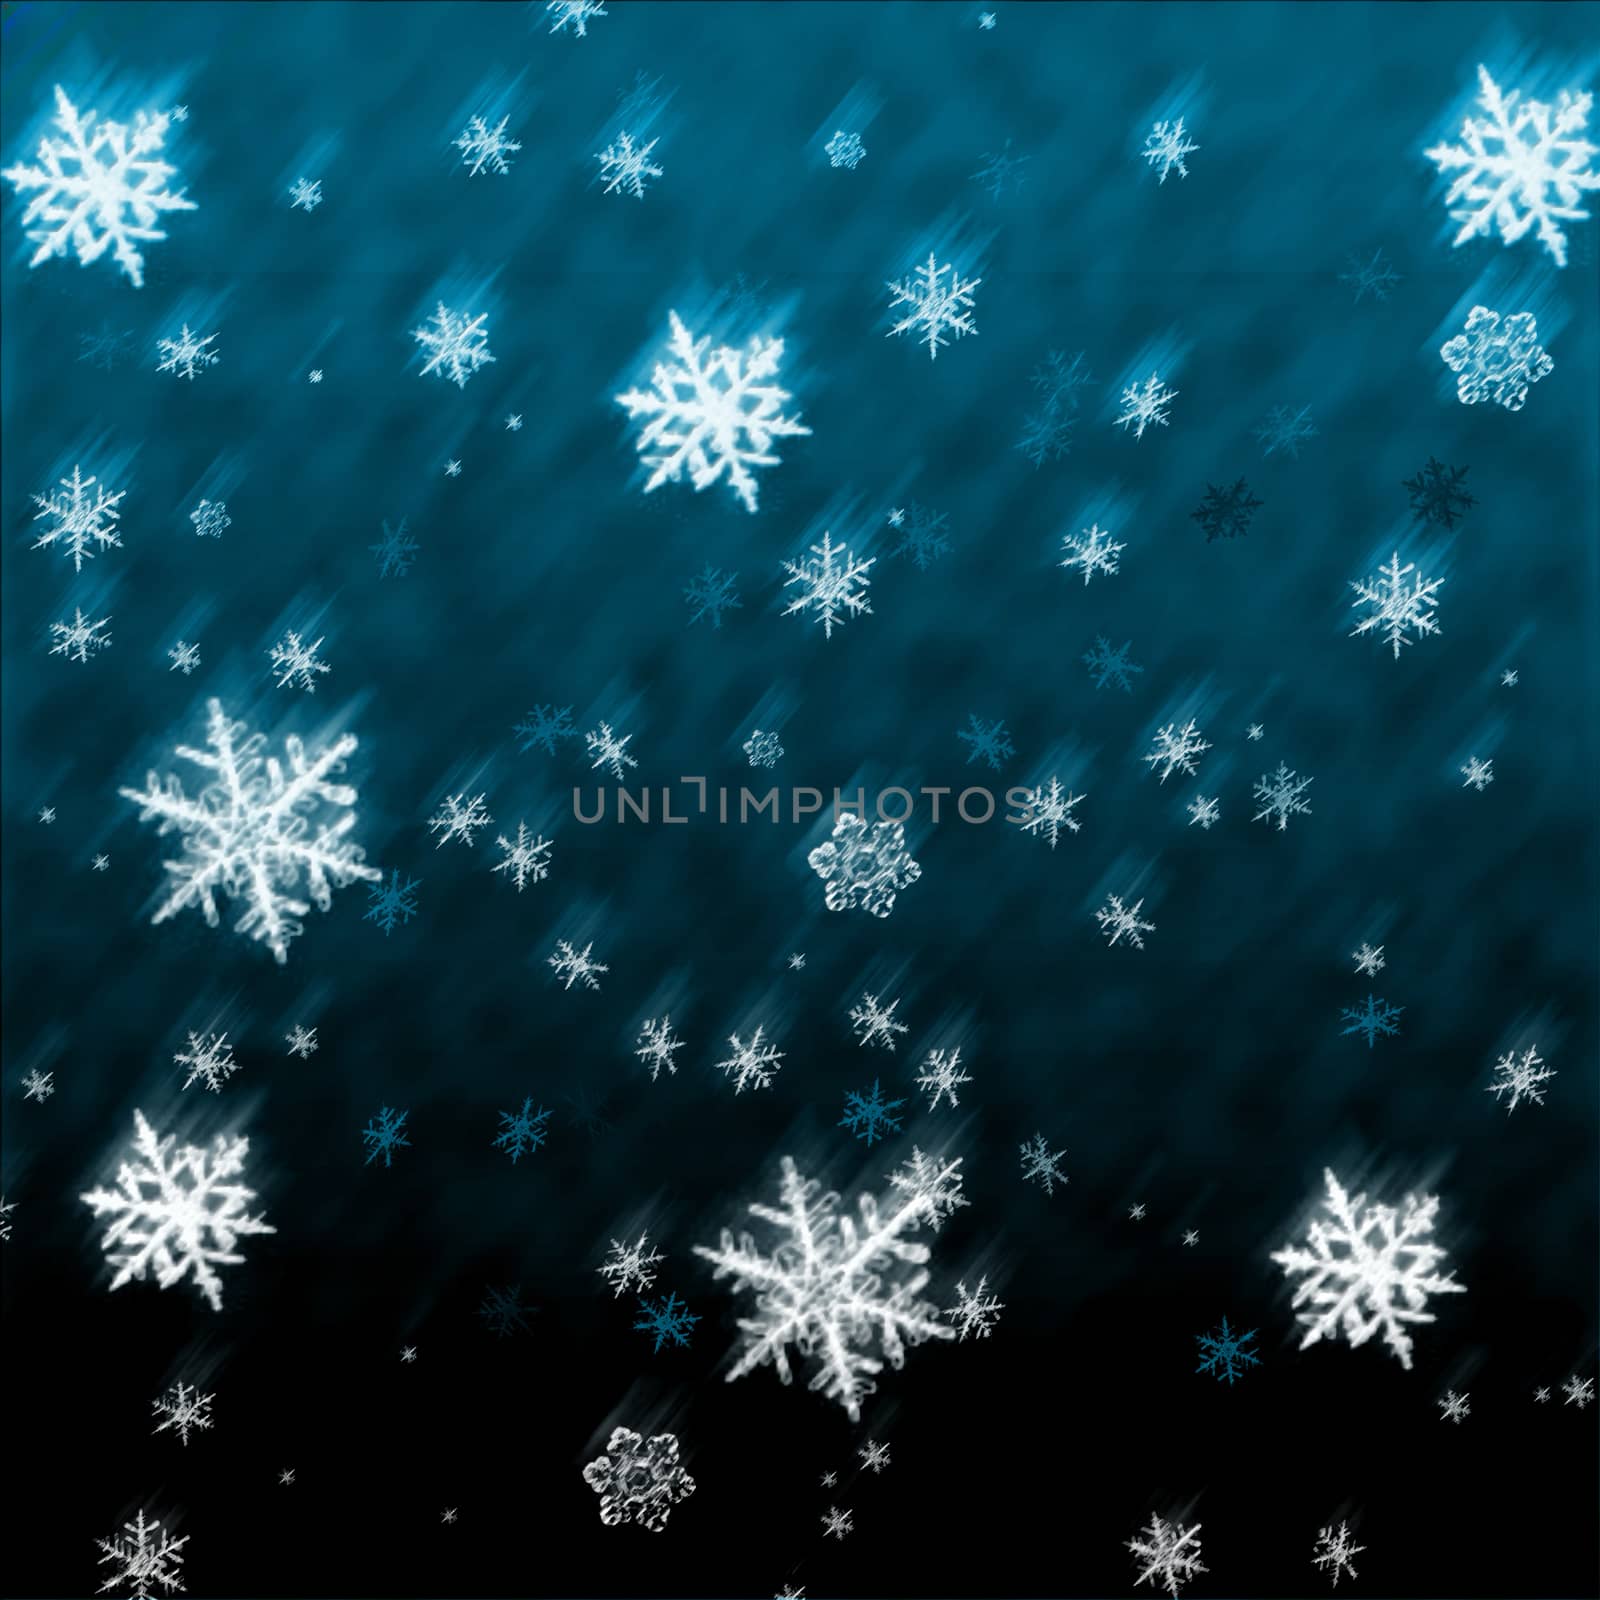 Falling snowflakes christmas card. Snow, winter pattern background illustration.